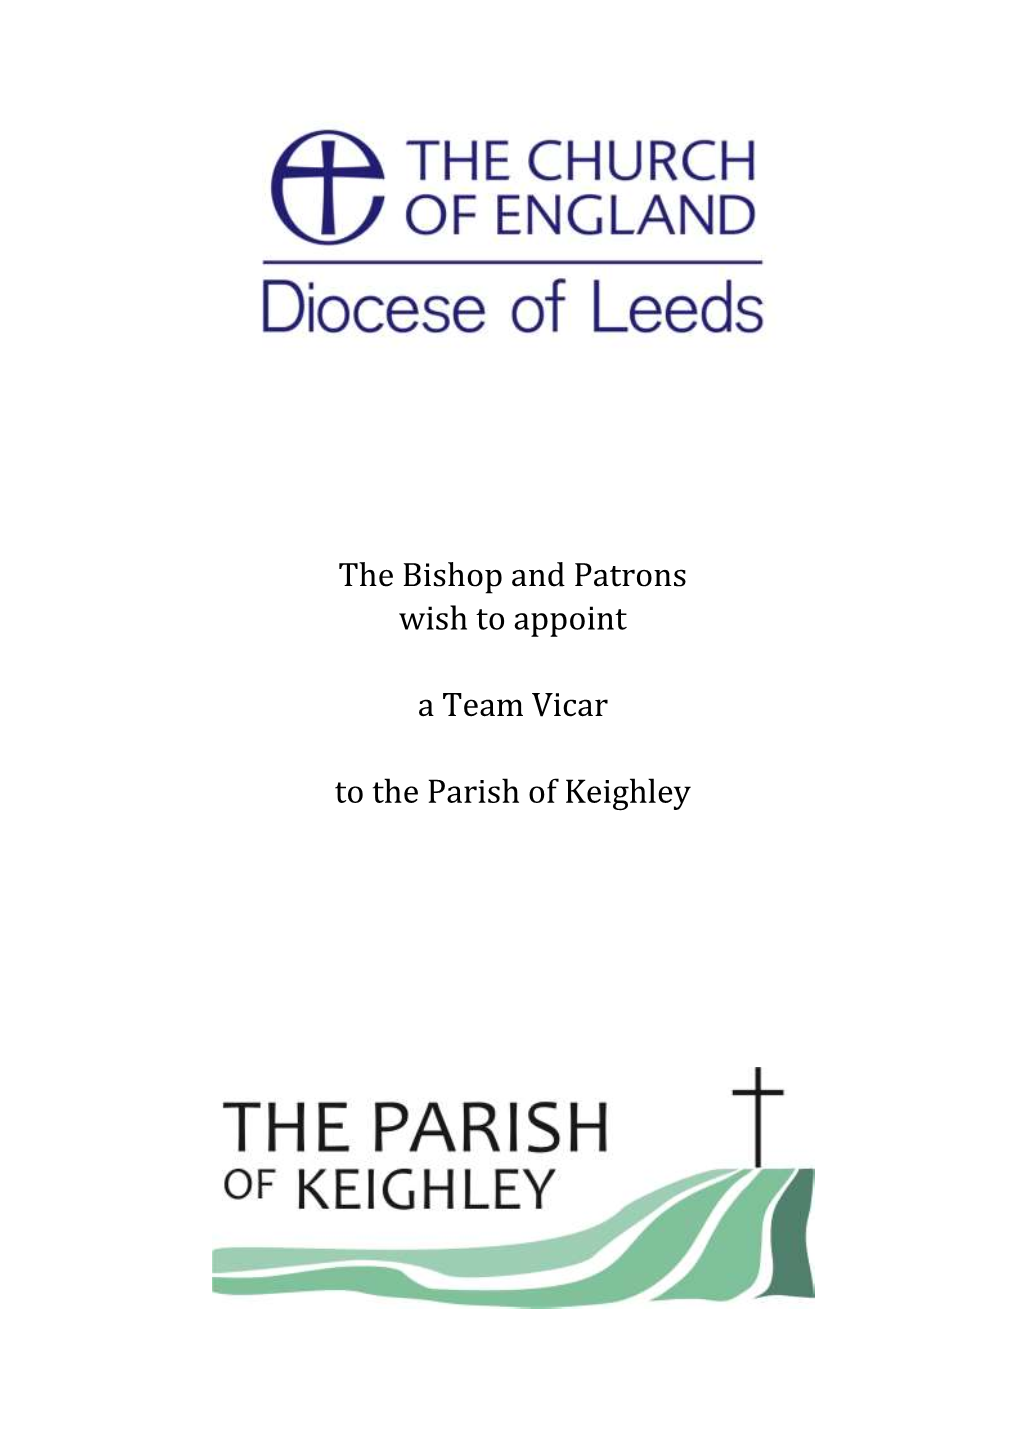 The Bishop and Patrons Wish to Appoint a Team Vicar to the Parish of Keighley